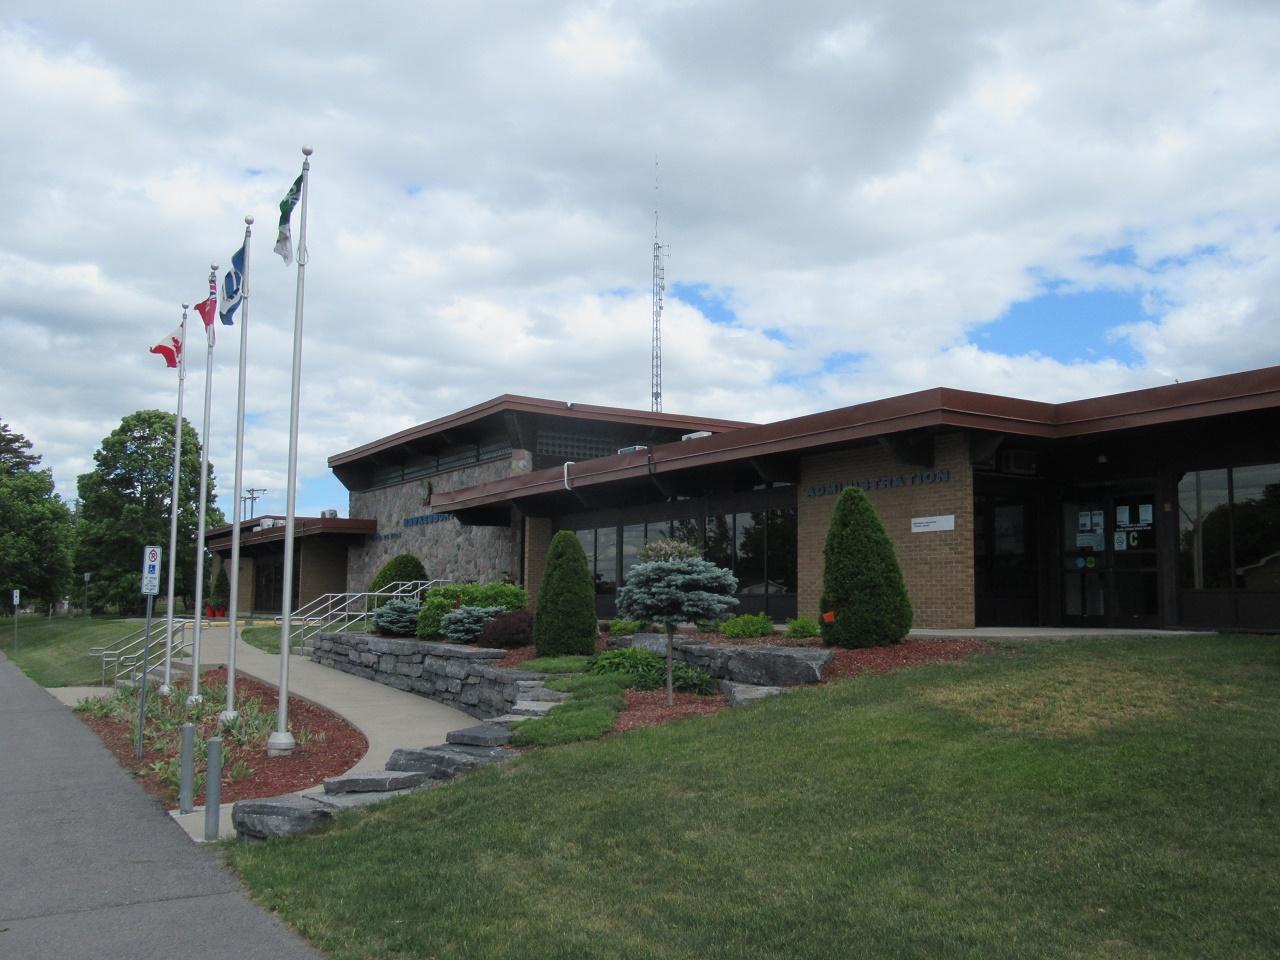 Closed session confusion over layoff decision at Hawkesbury council meeting